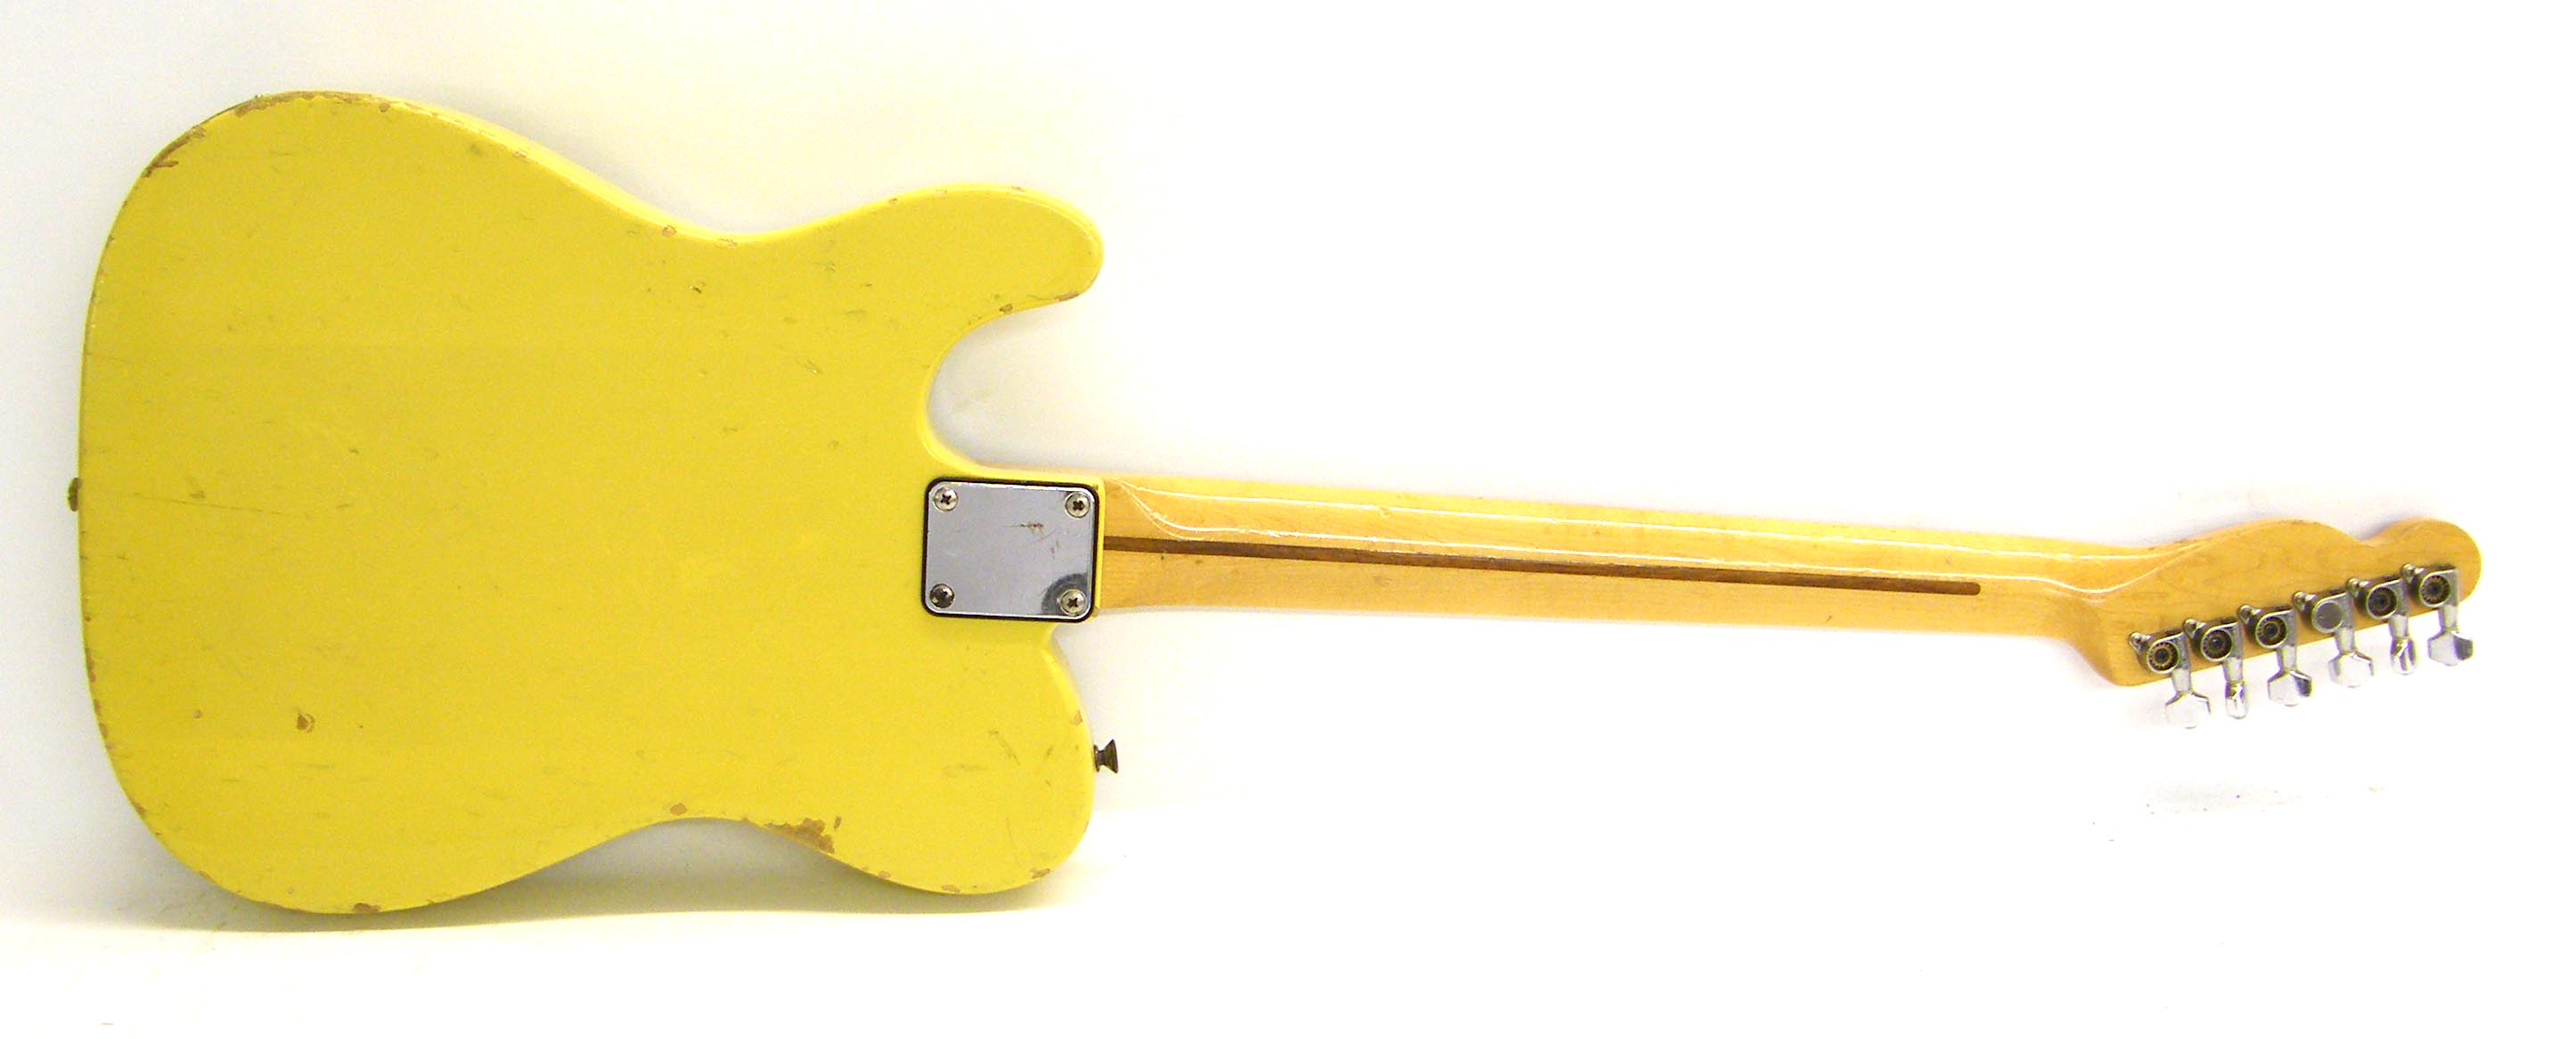 Mid 1980s Fender Telecaster TL-354 electric guitar, made in Japan, ser. no. E955839, blonde finish - Image 2 of 2